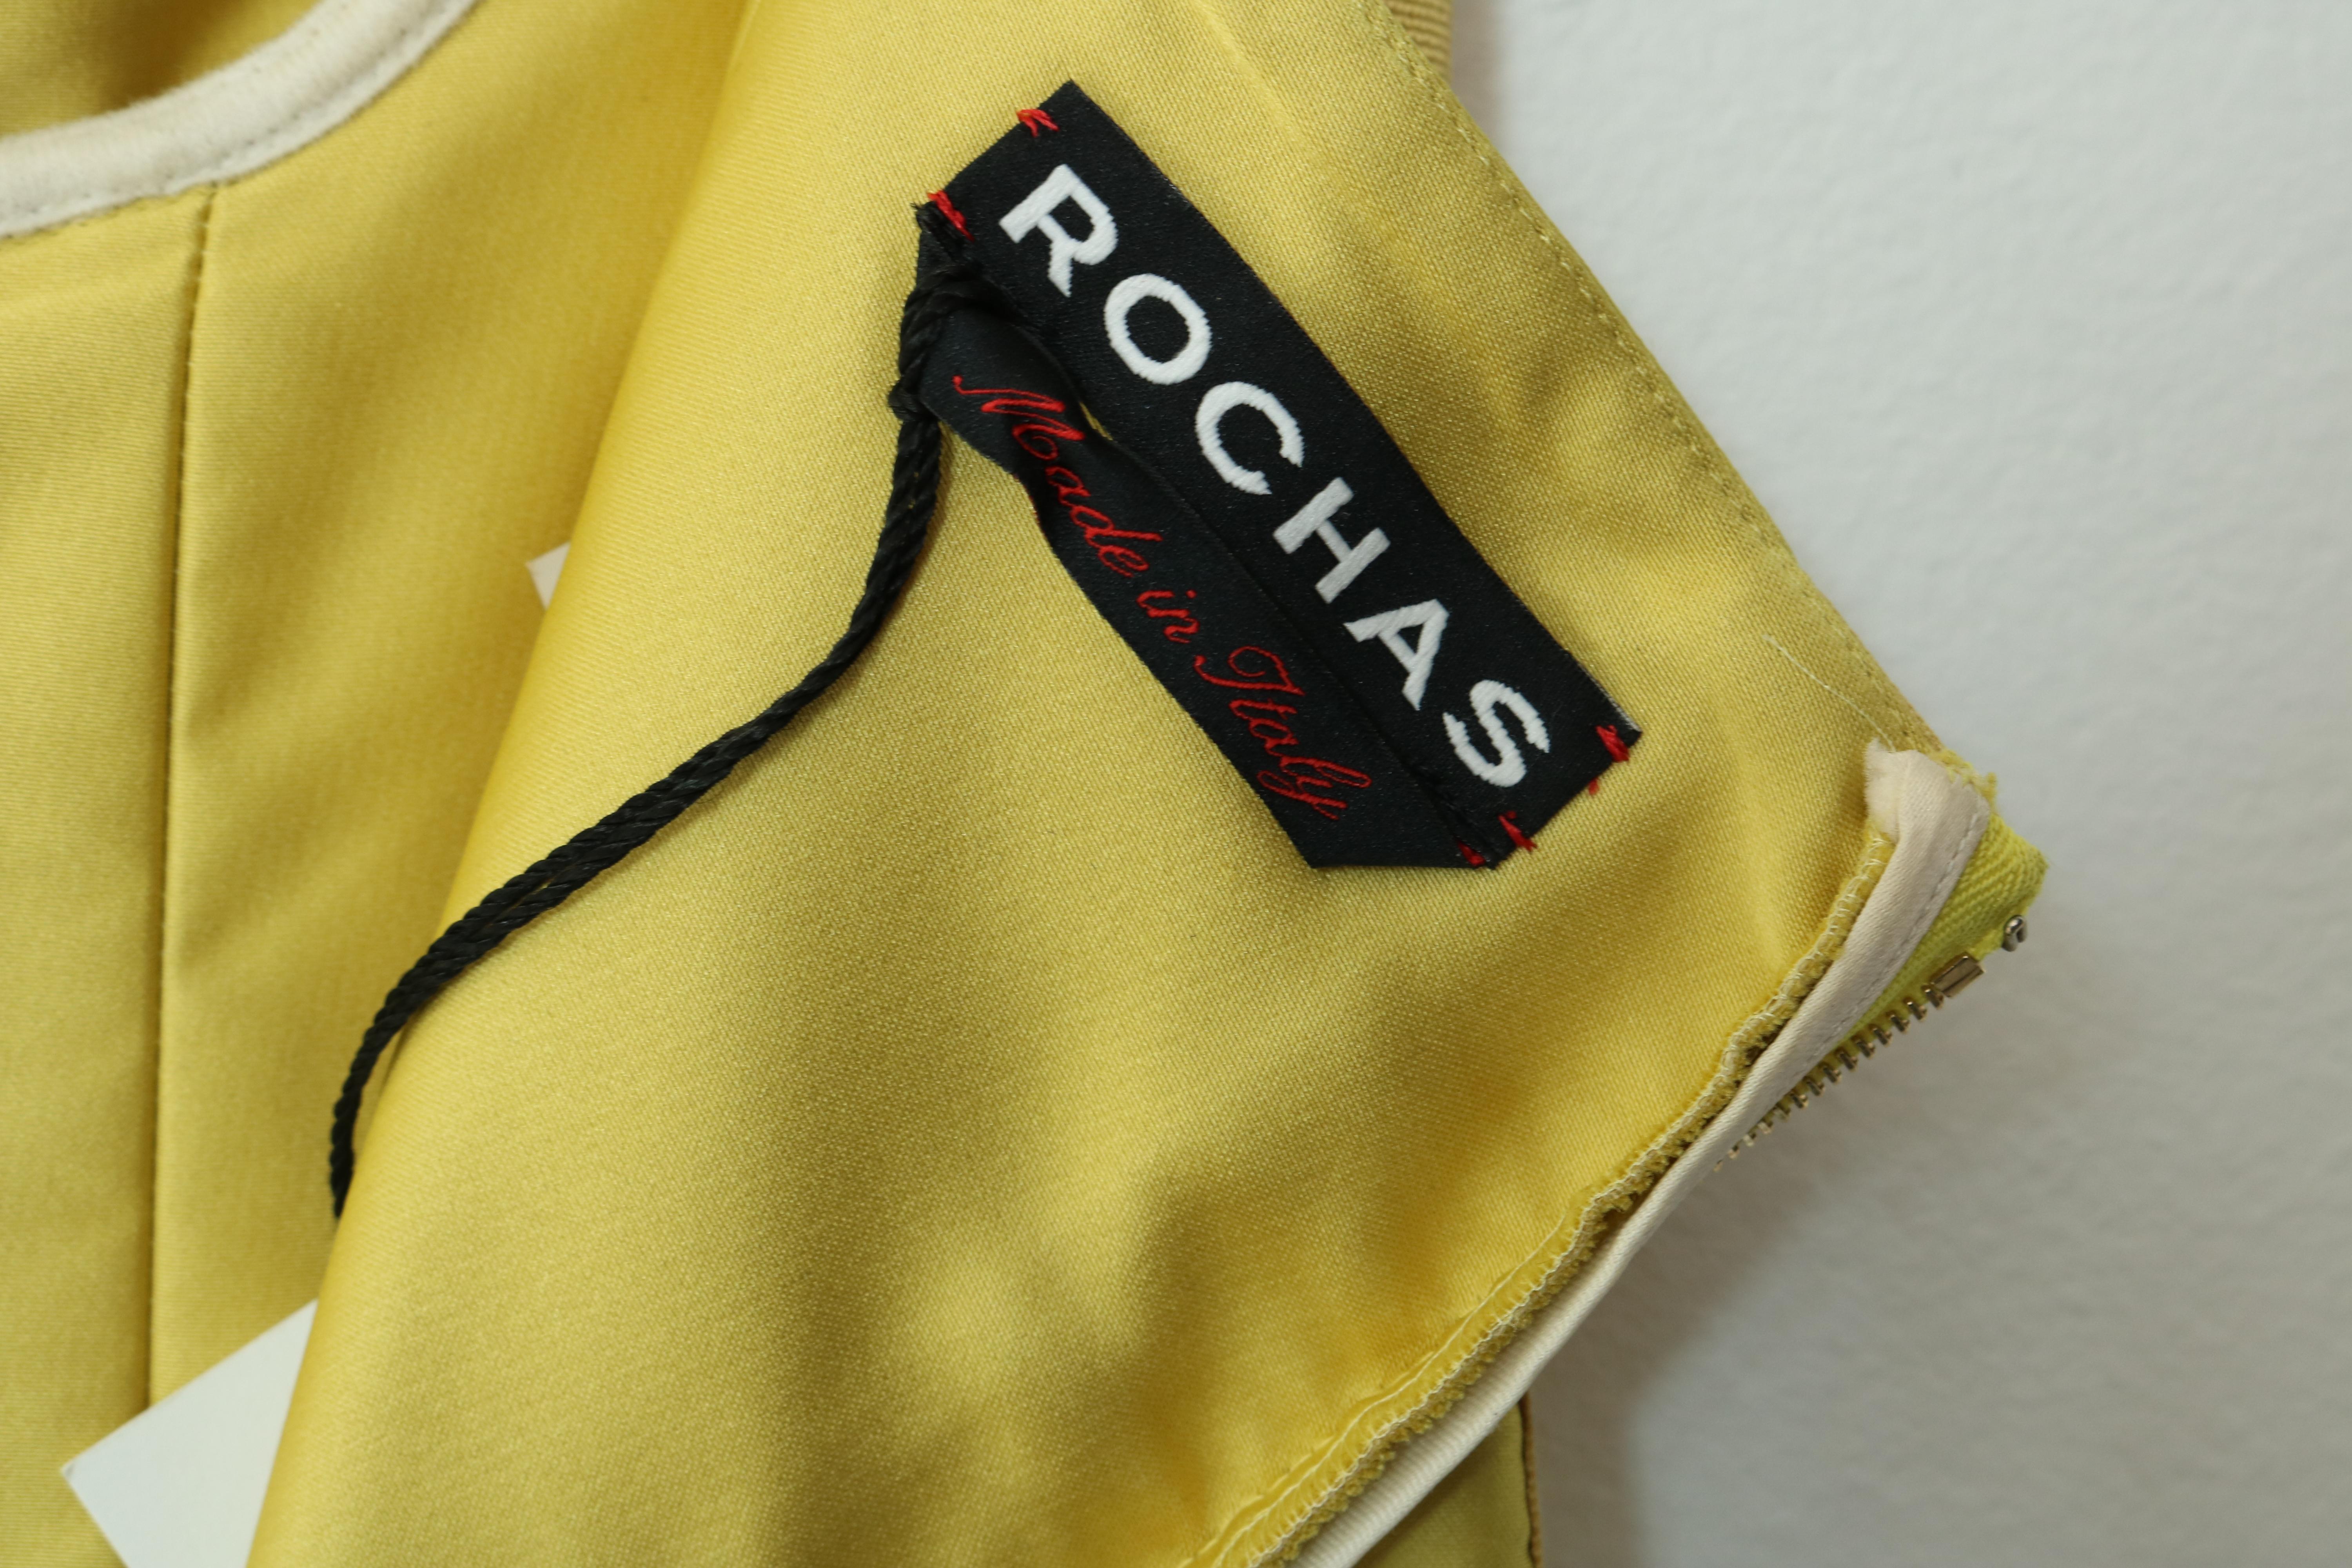  Rochas Gold Gown In Excellent Condition For Sale In Thousand Oaks, CA